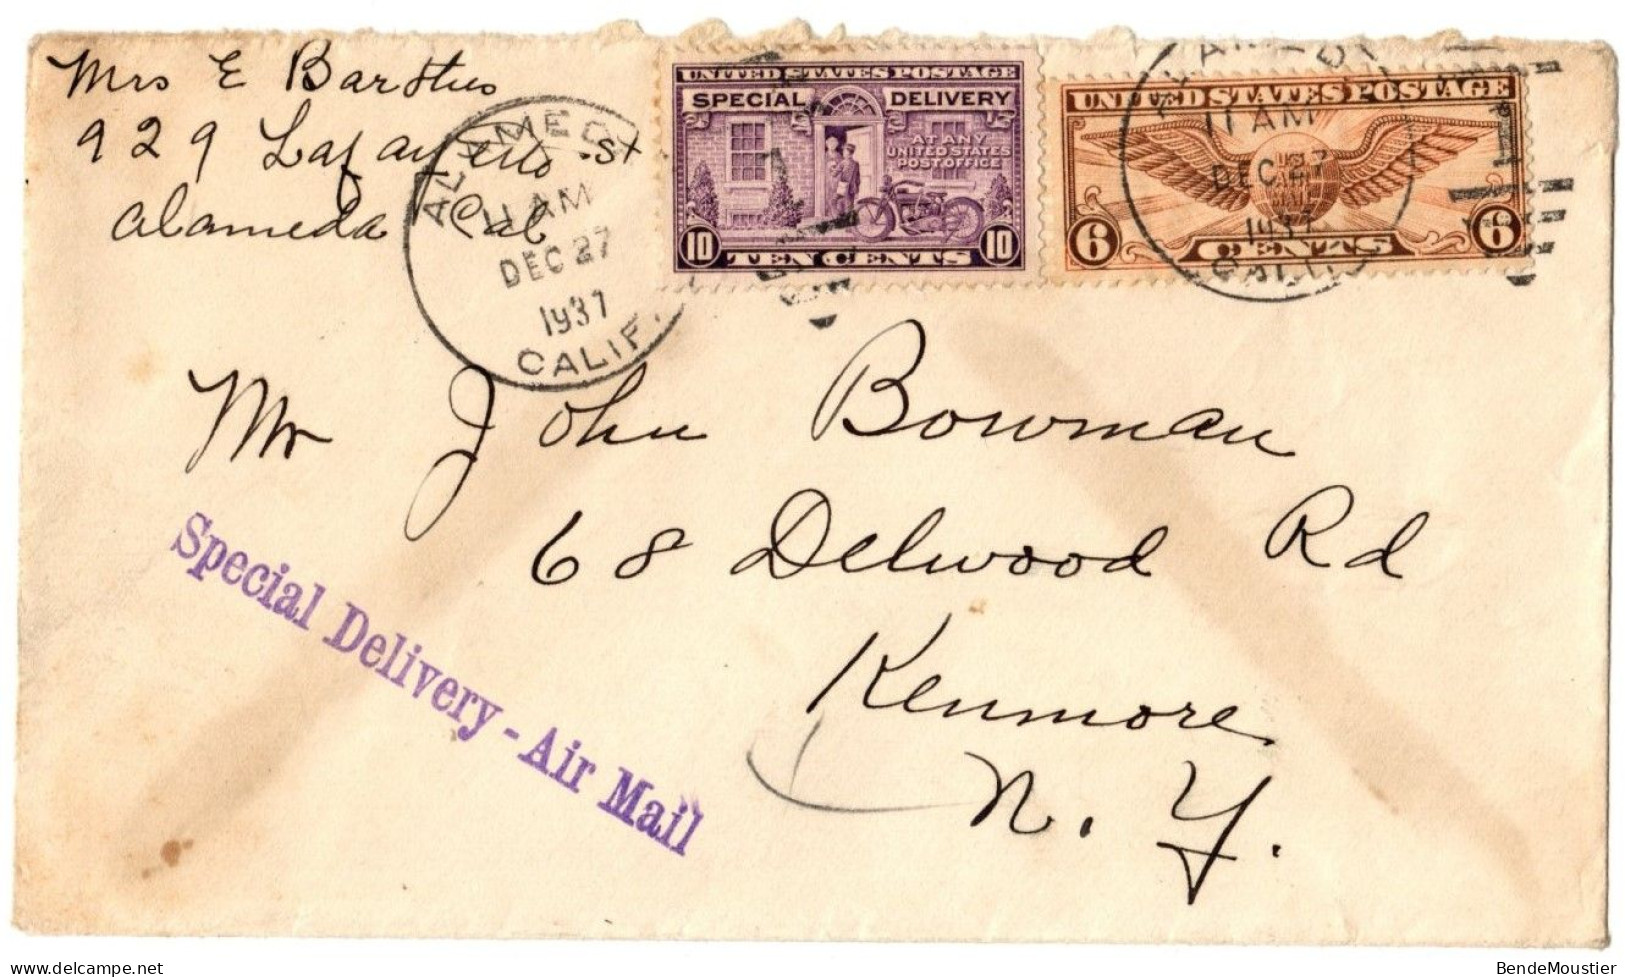 (R113) USA Scott # C19 & #  E 12 - Special Delivery Air Mail - Alameda (Calif) - Buffalo - Chicago Air Mail Field - 1937 - 1c. 1918-1940 Covers